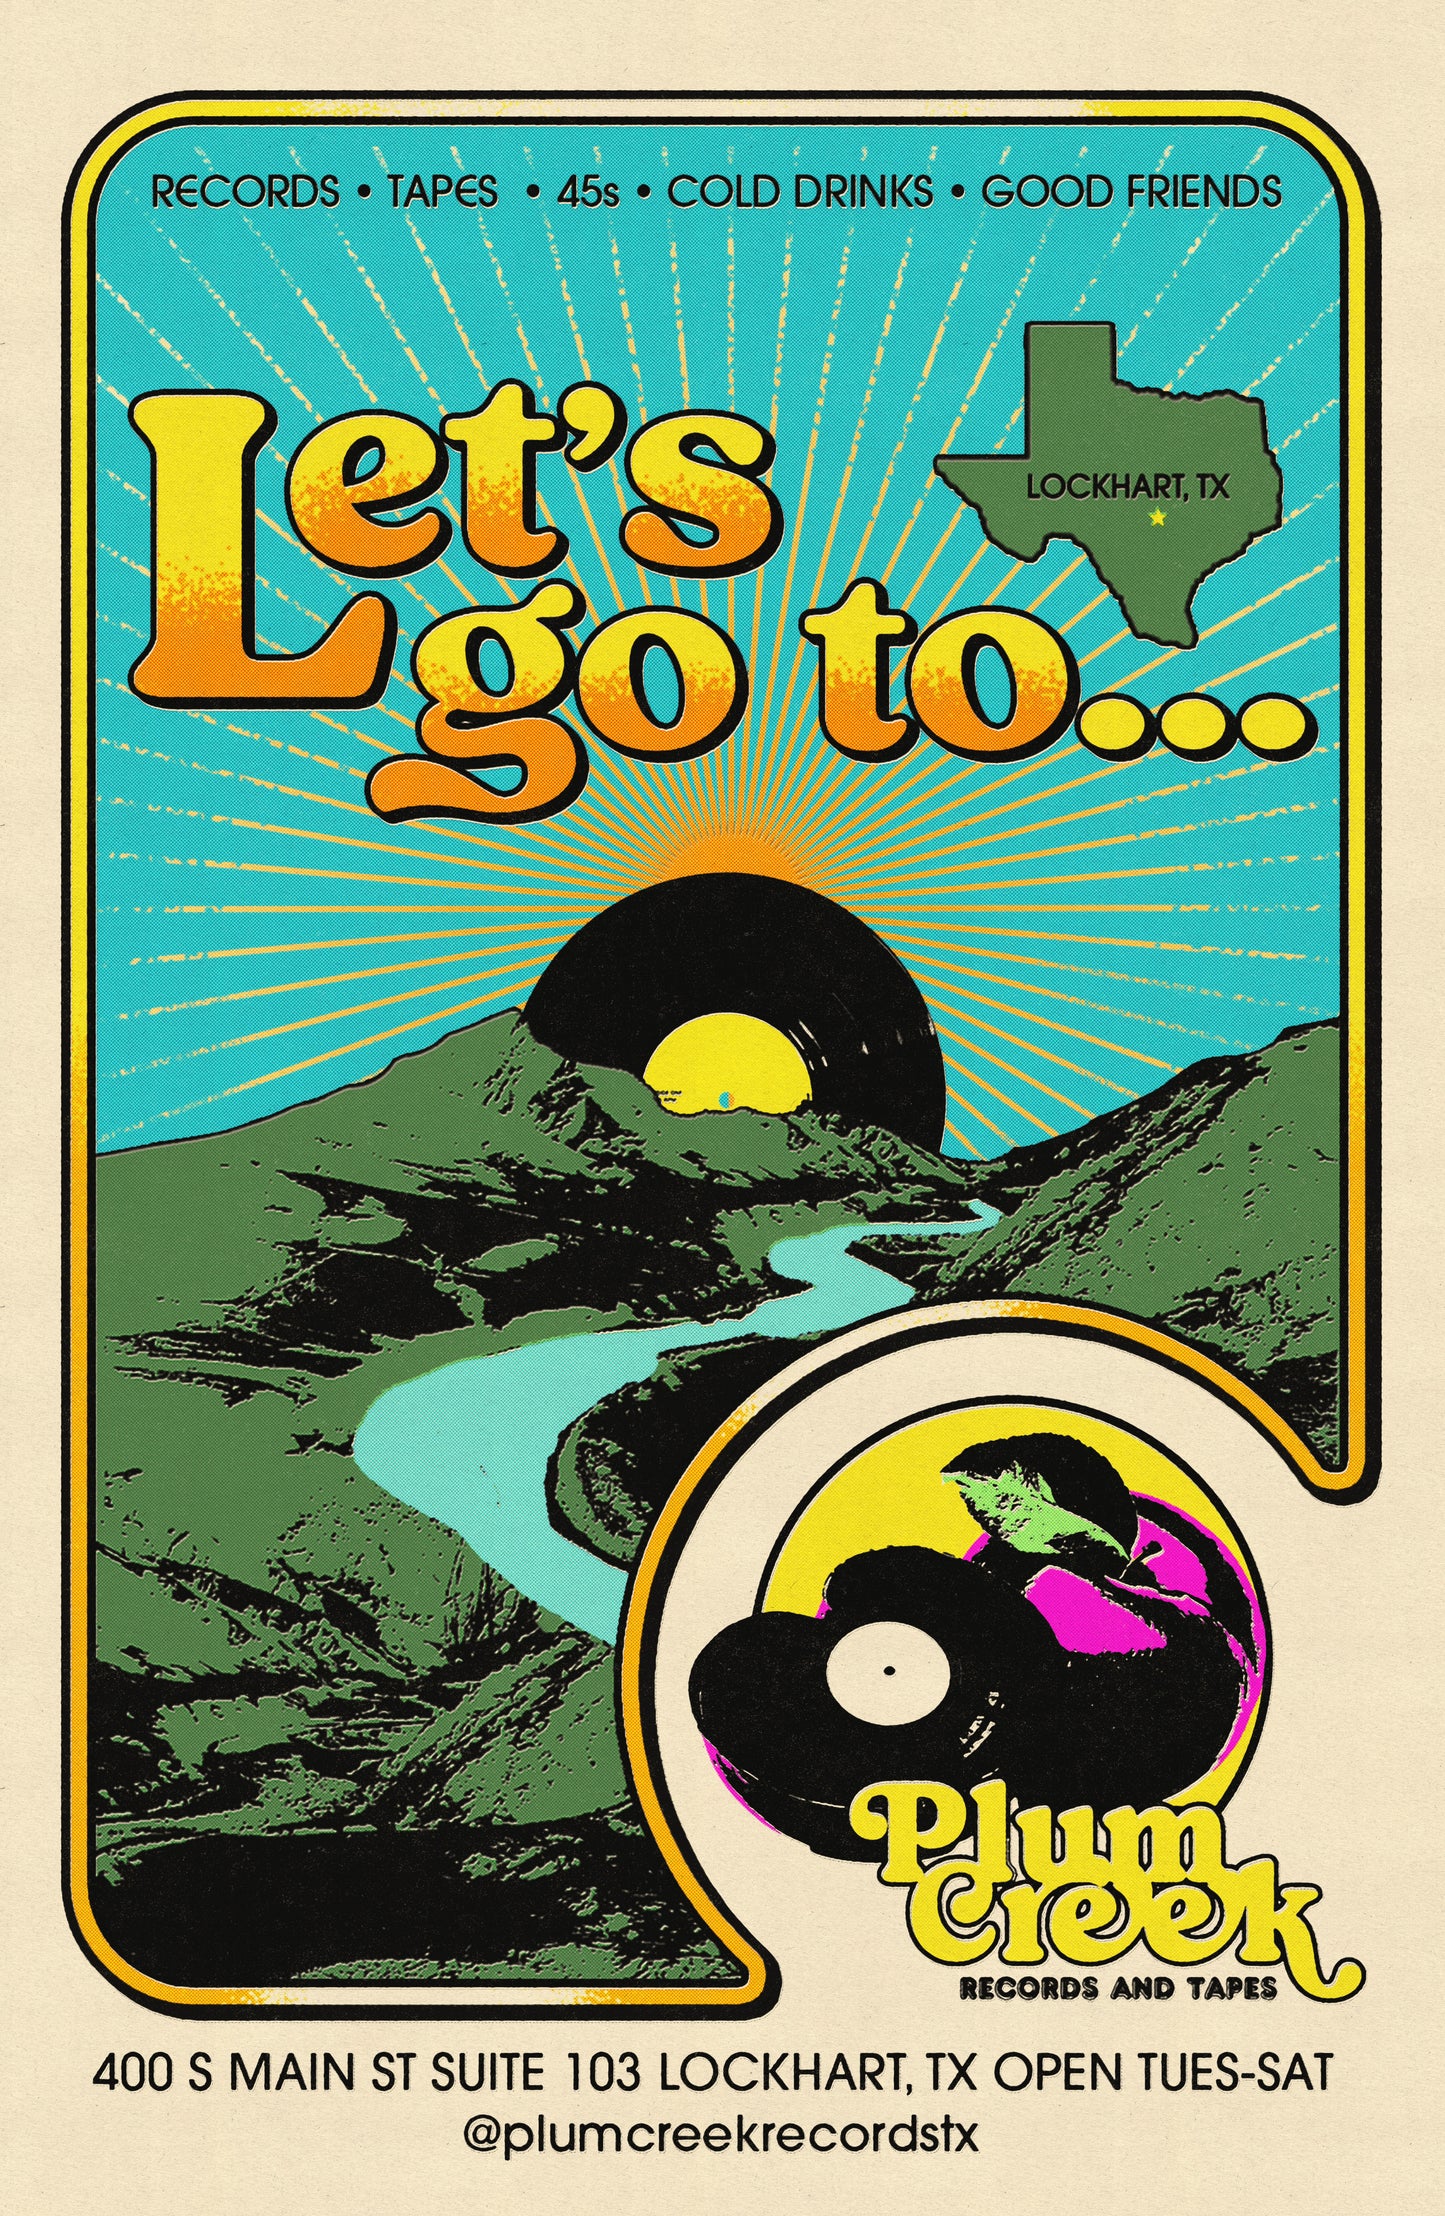 "Let's go to Plum Creek" 11x17 Printed Poster